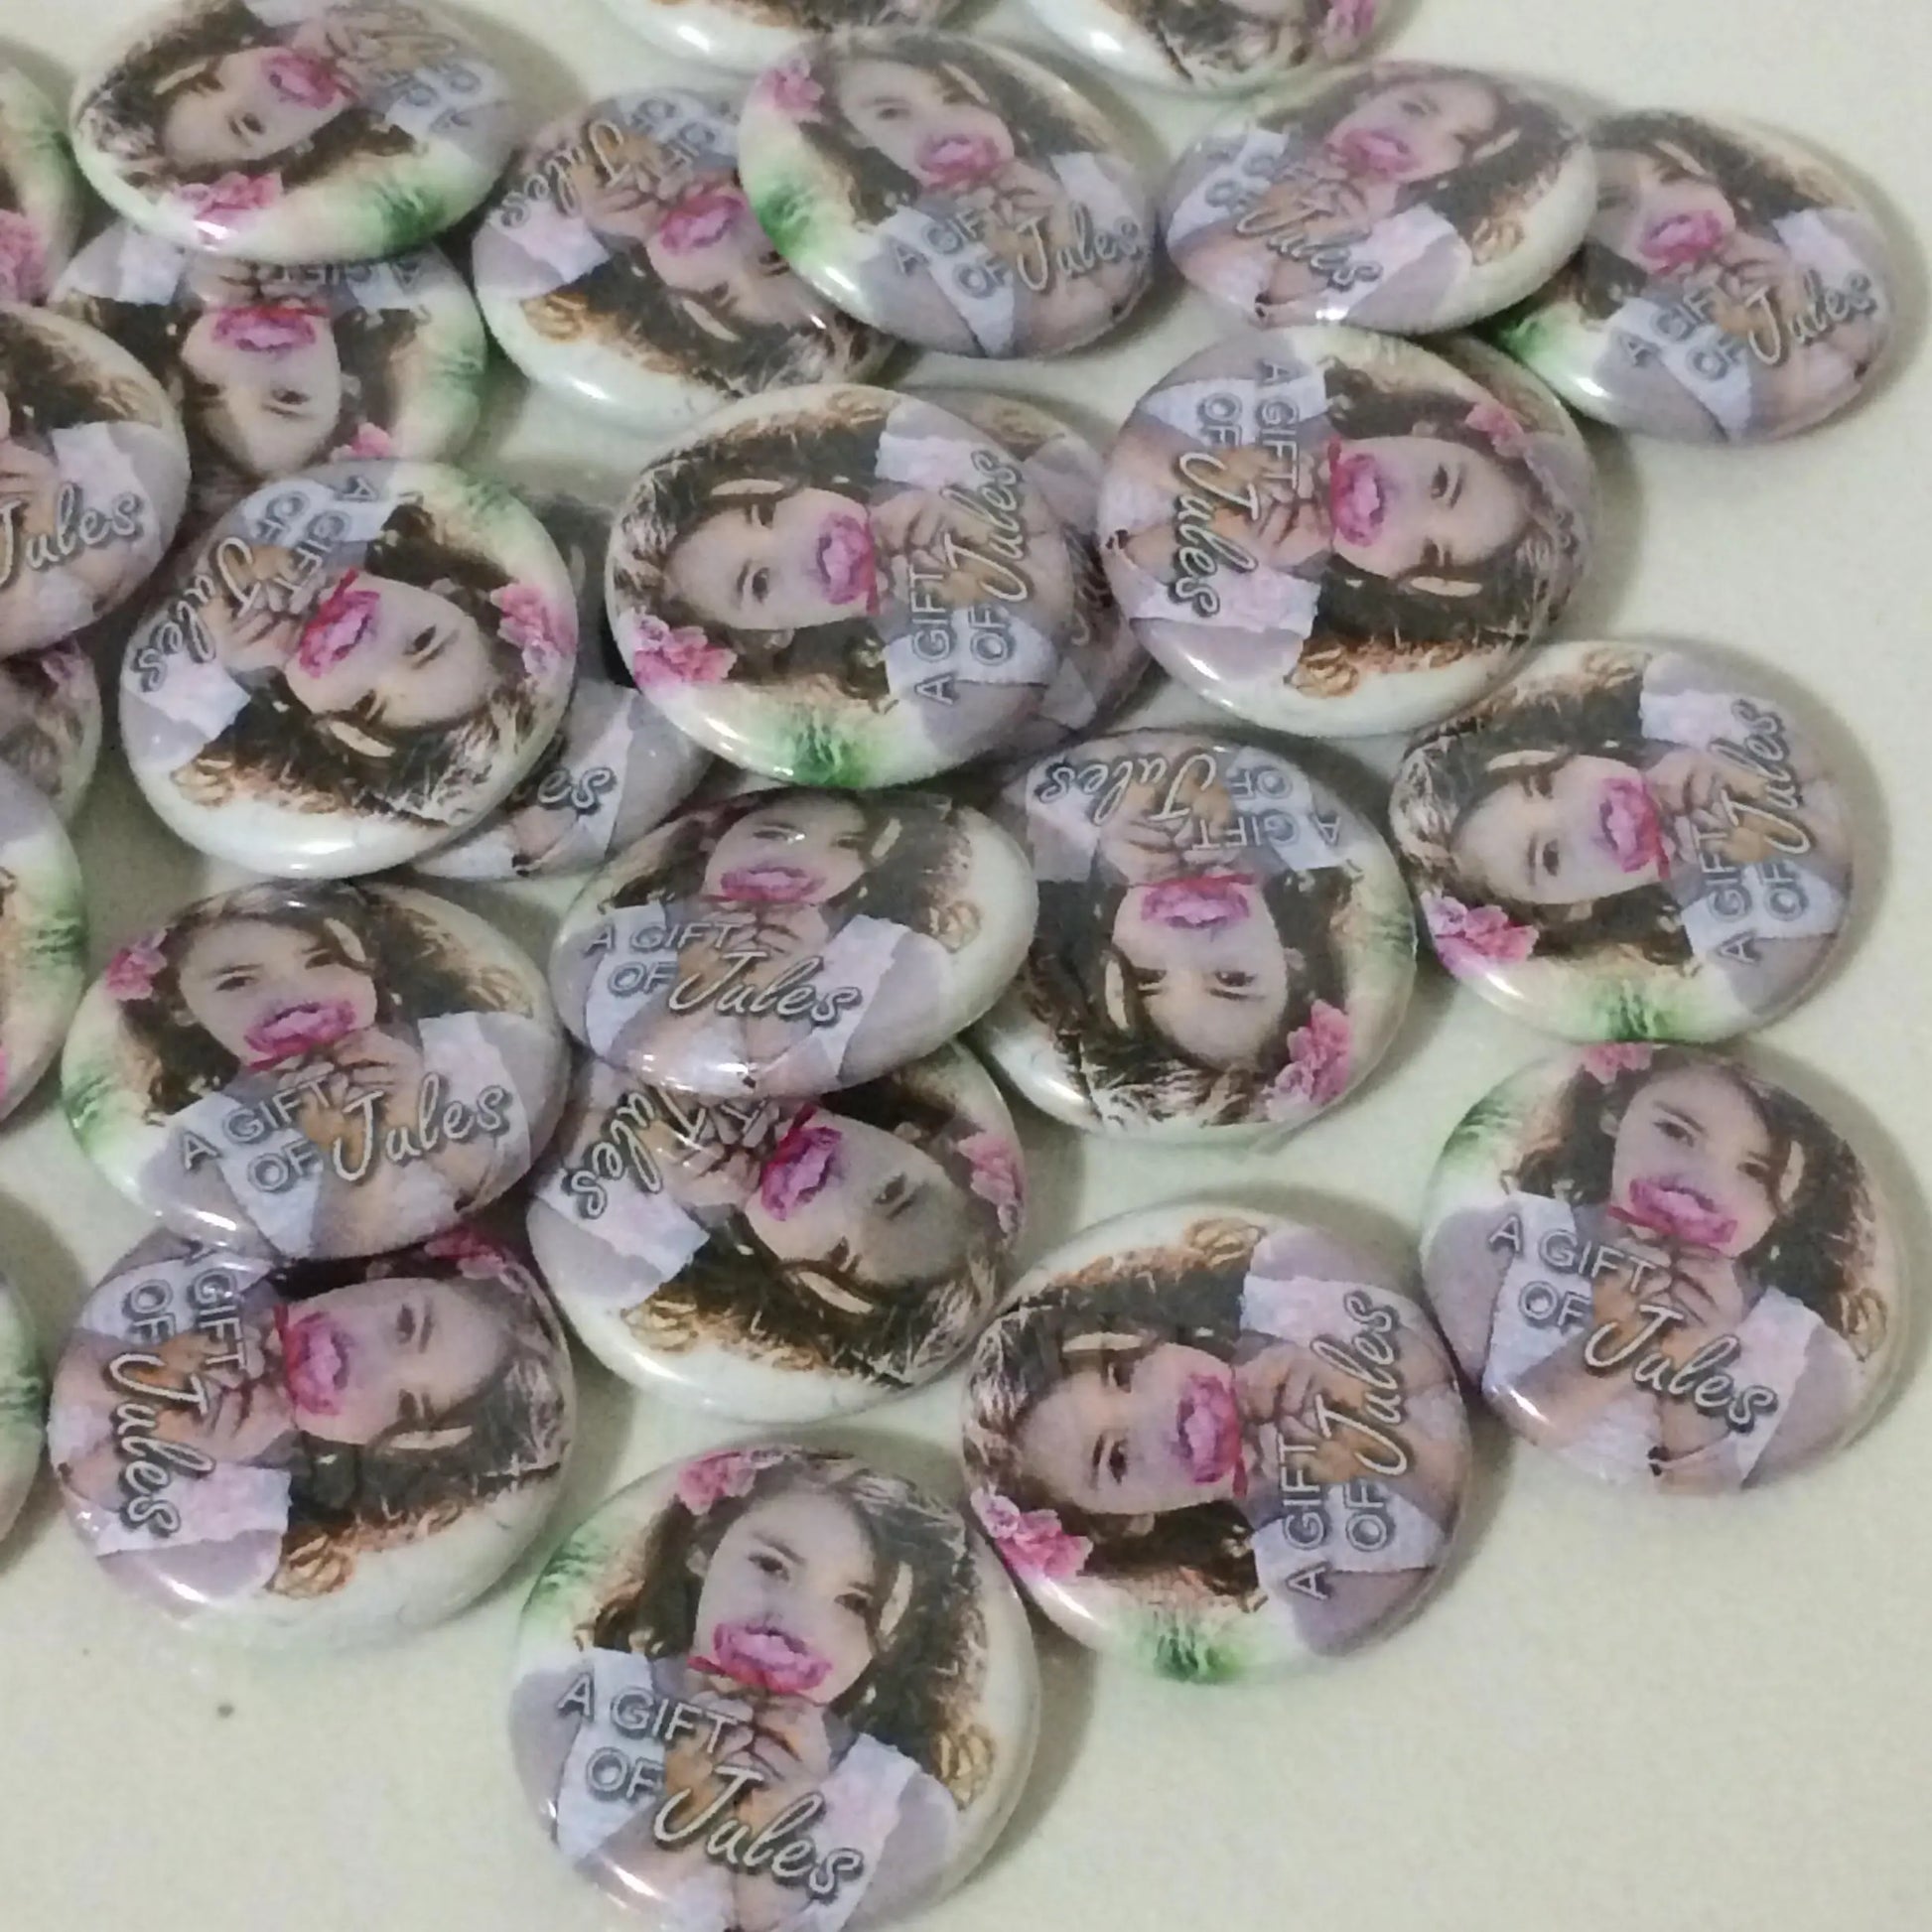 Custom Sympathy Gift - Bereavement Gift In Memory of Miscarriage Gift - Memorial Gift Photo Button Pins 20 pieces